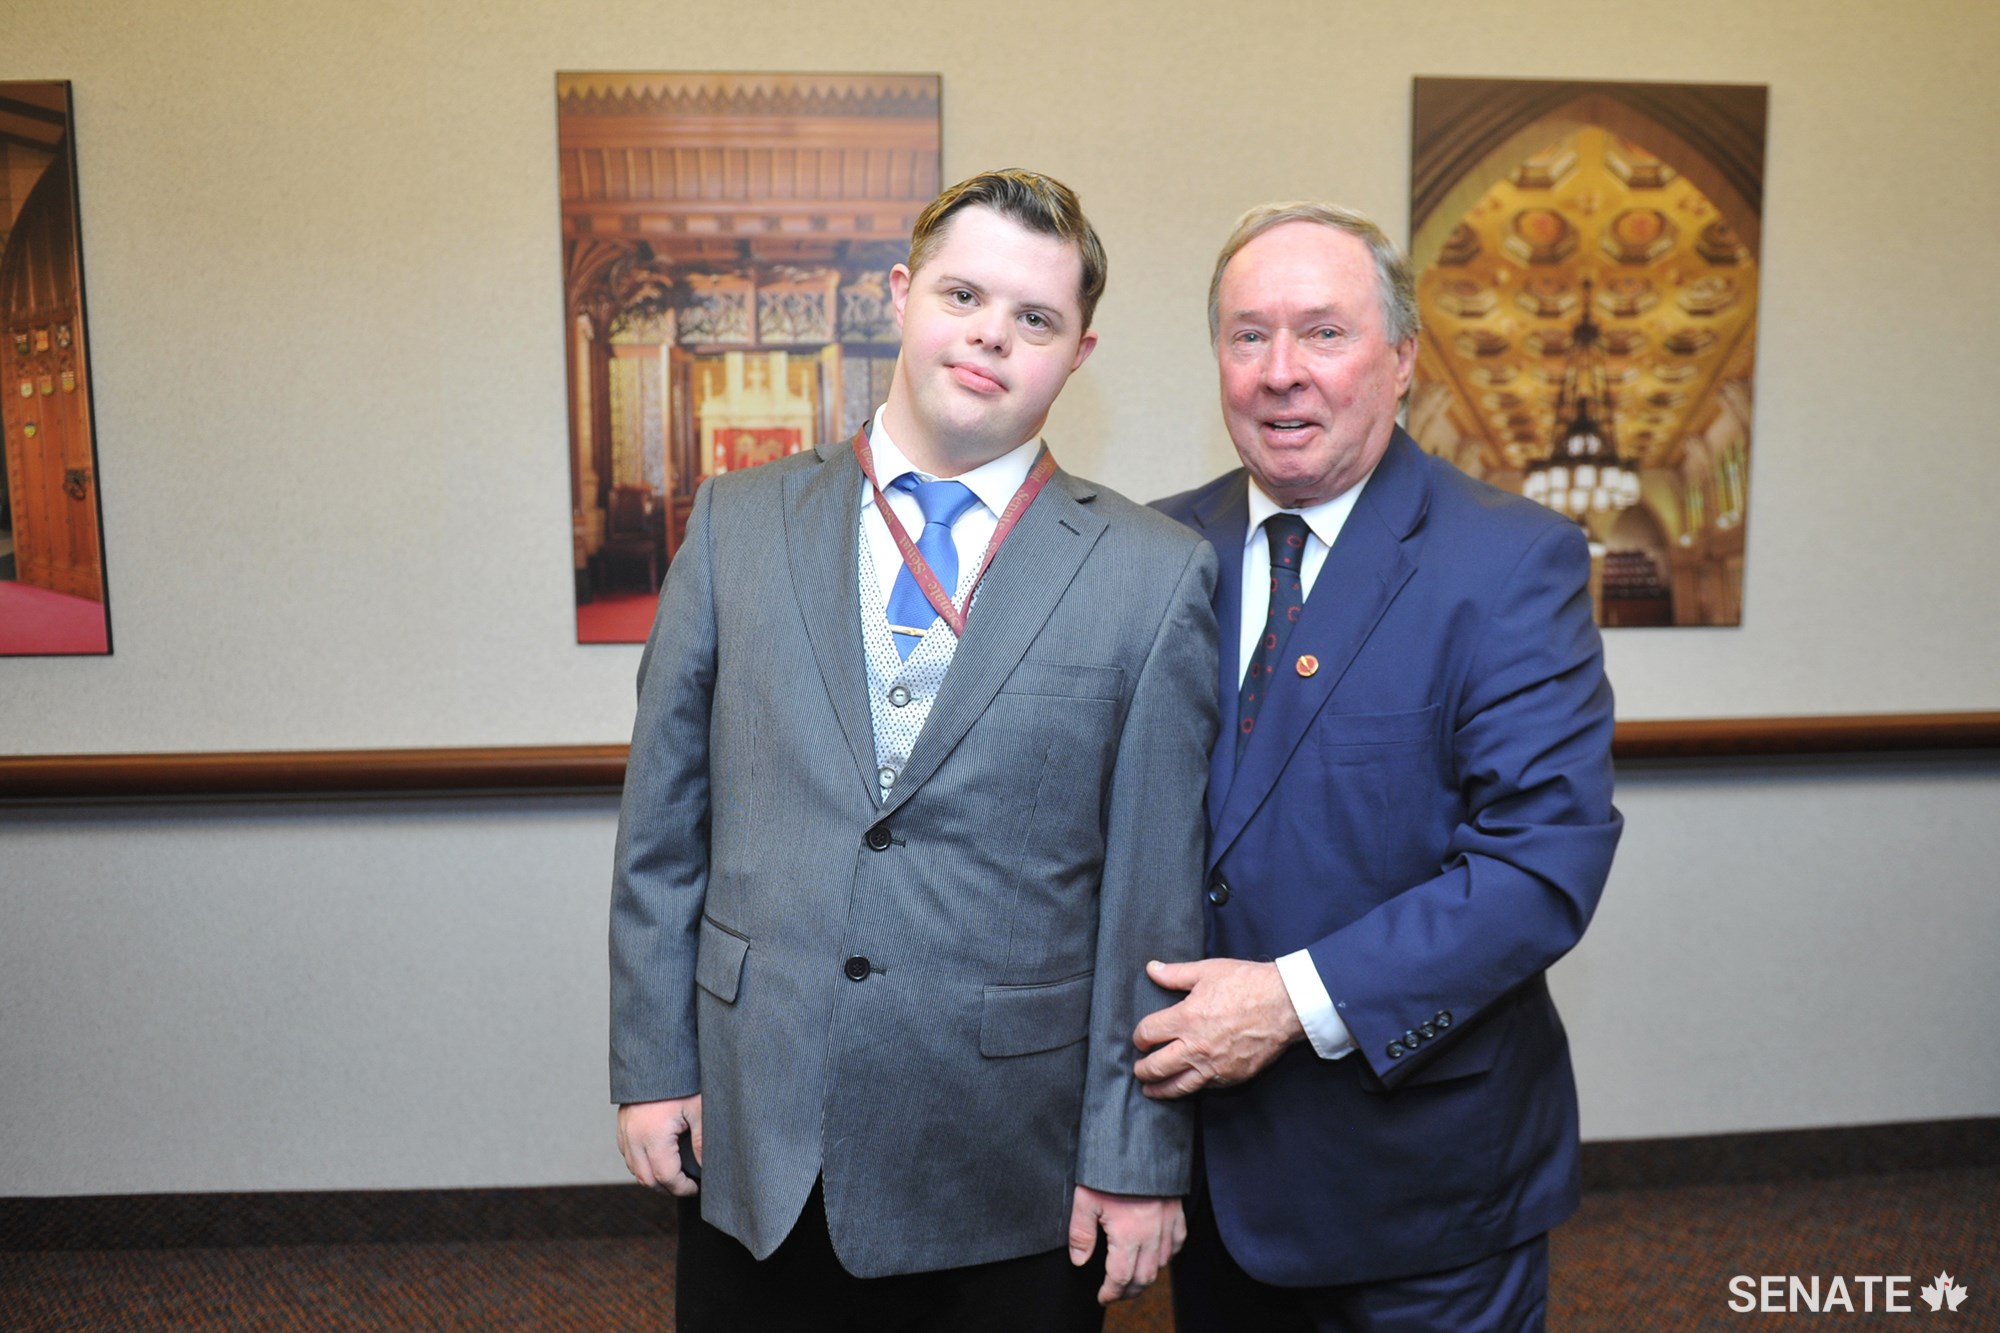 Michael Hurley-Trinque starts each work day with a big smile and hug from Senator Jim Munson.